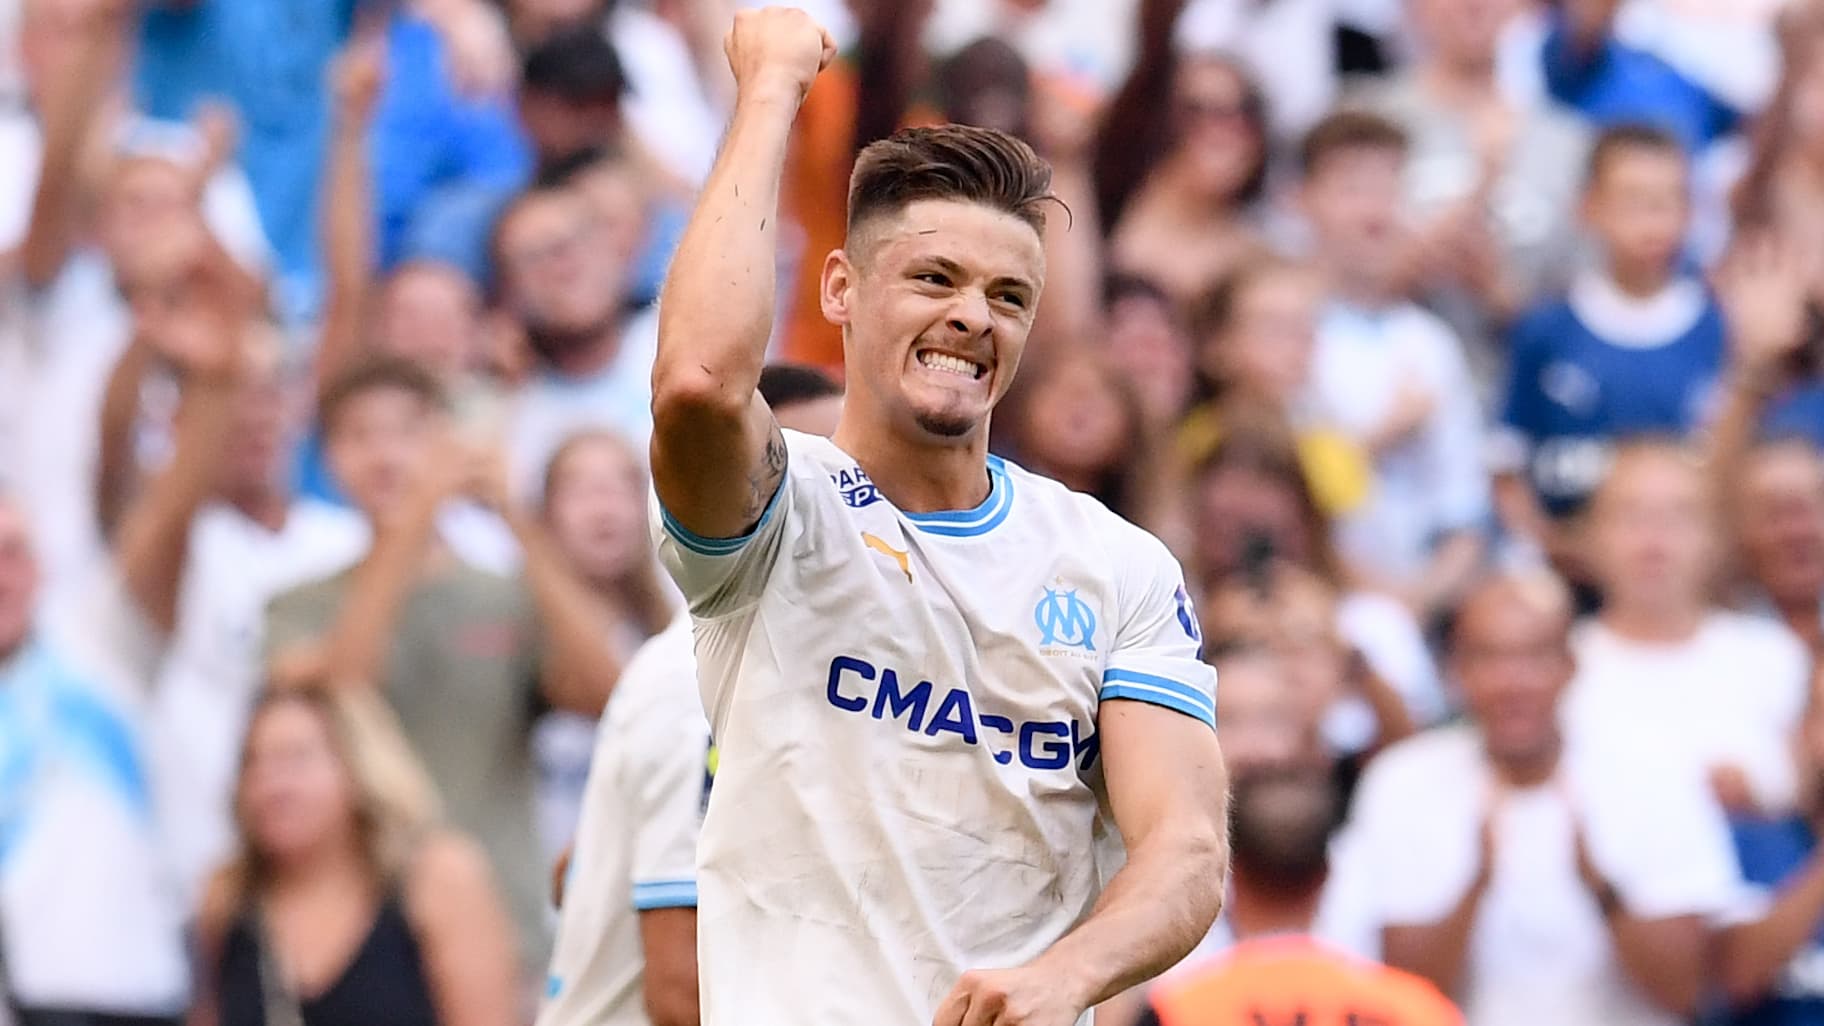 “There are no other clubs,” Vitina assures, that his future is in OM